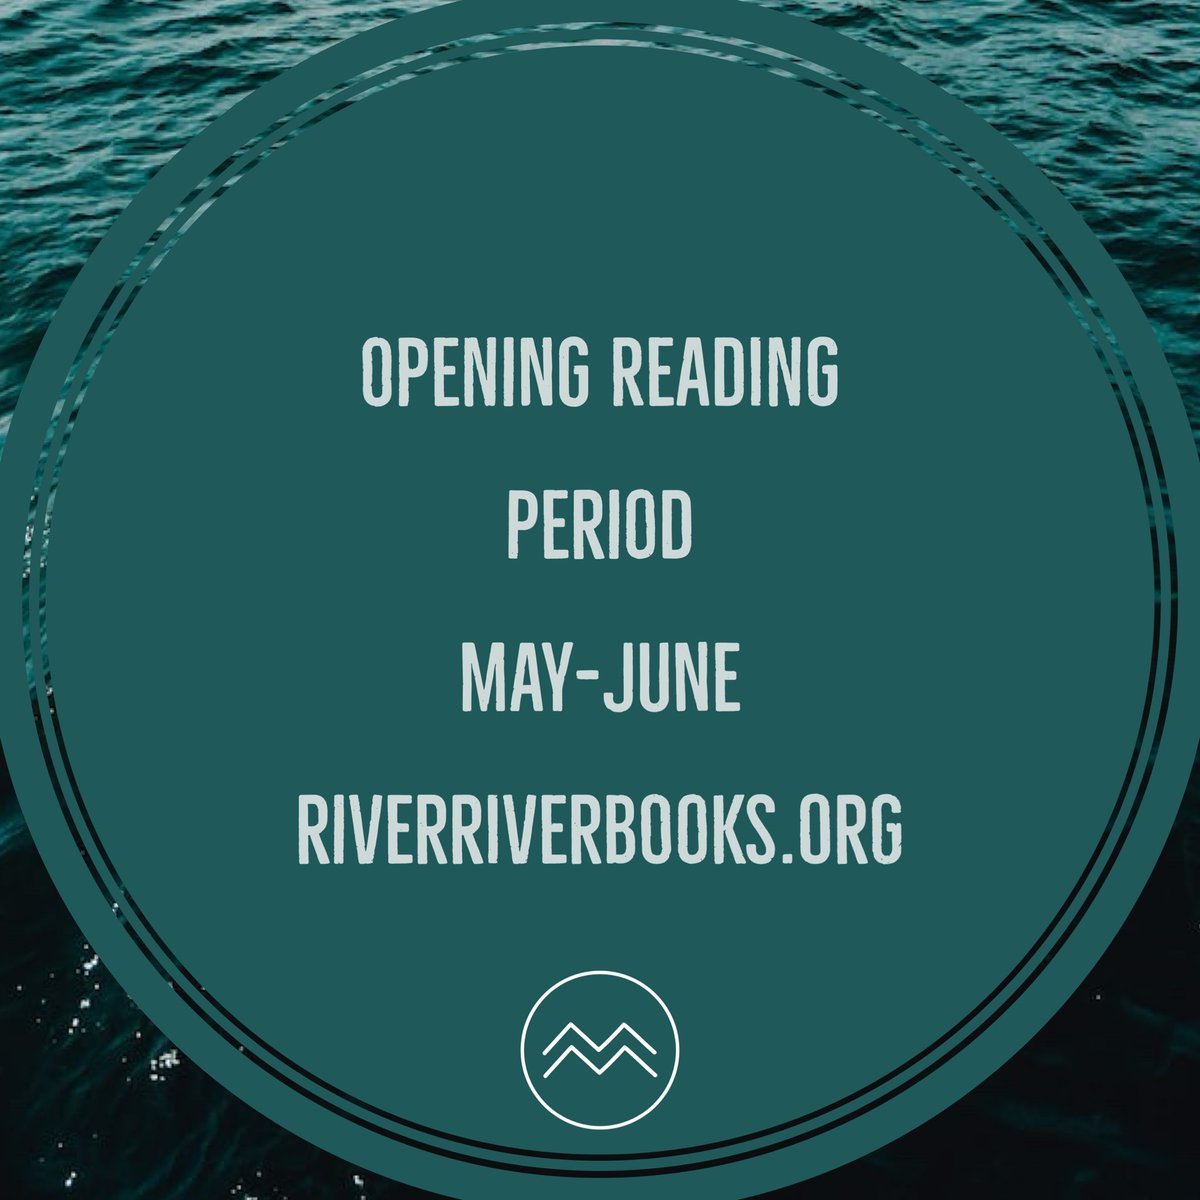 We open May 1 to full-length poetry manuscripts! More submission information and contract here: riverriverbooks.org We can’t wait to read your poems! 🌊🌊